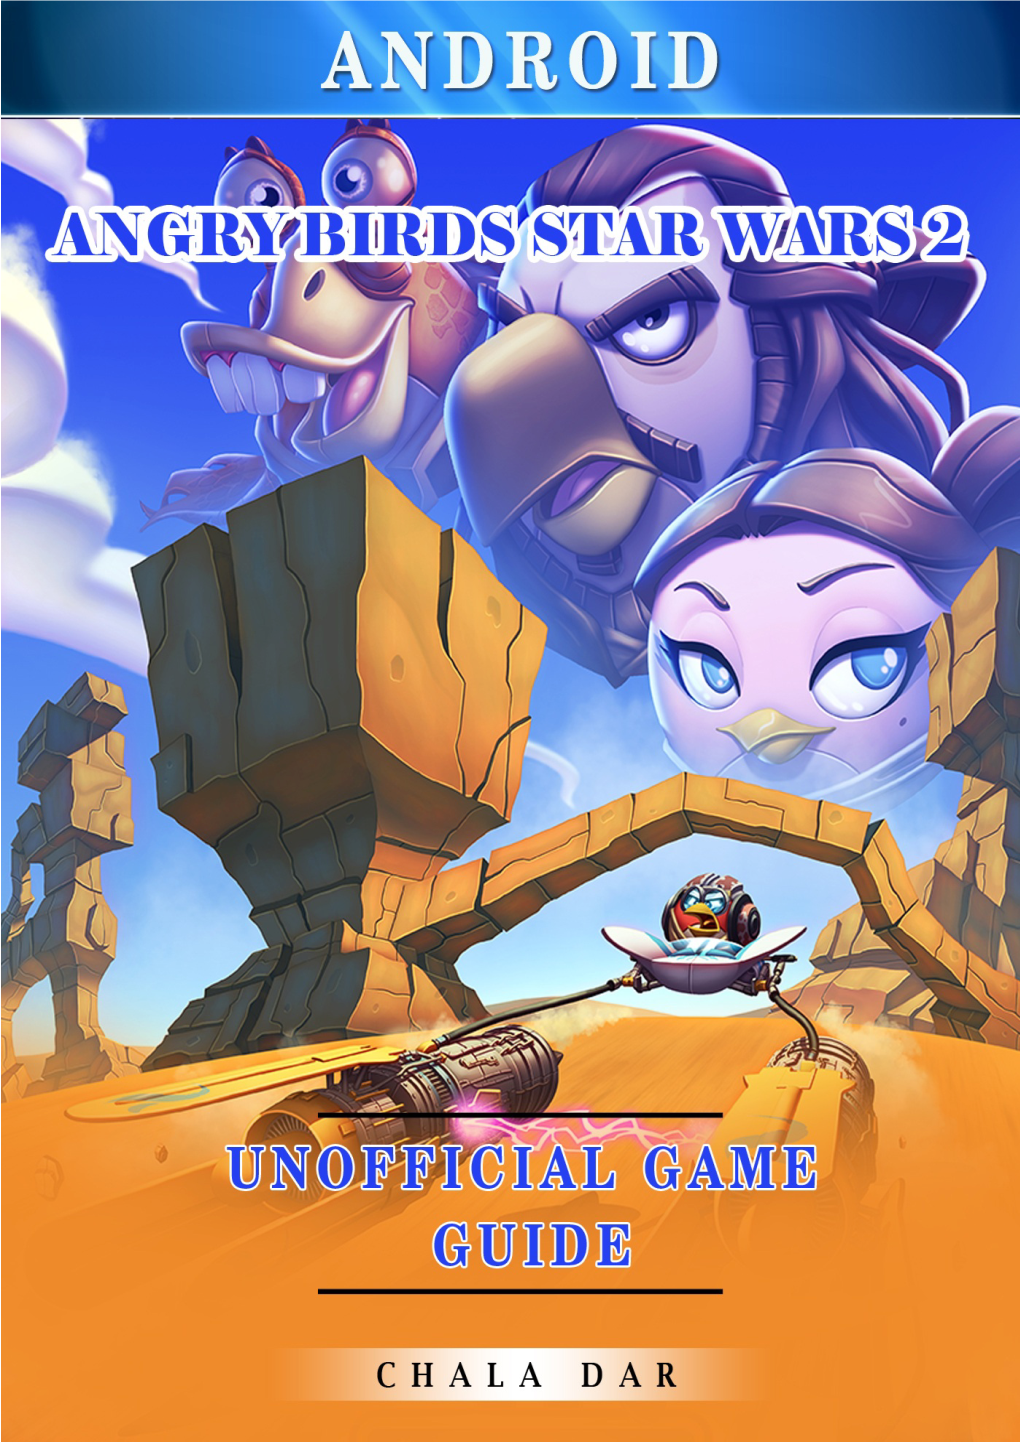 Angry Birds Star Wars 2 Android Unofficial Game Guide